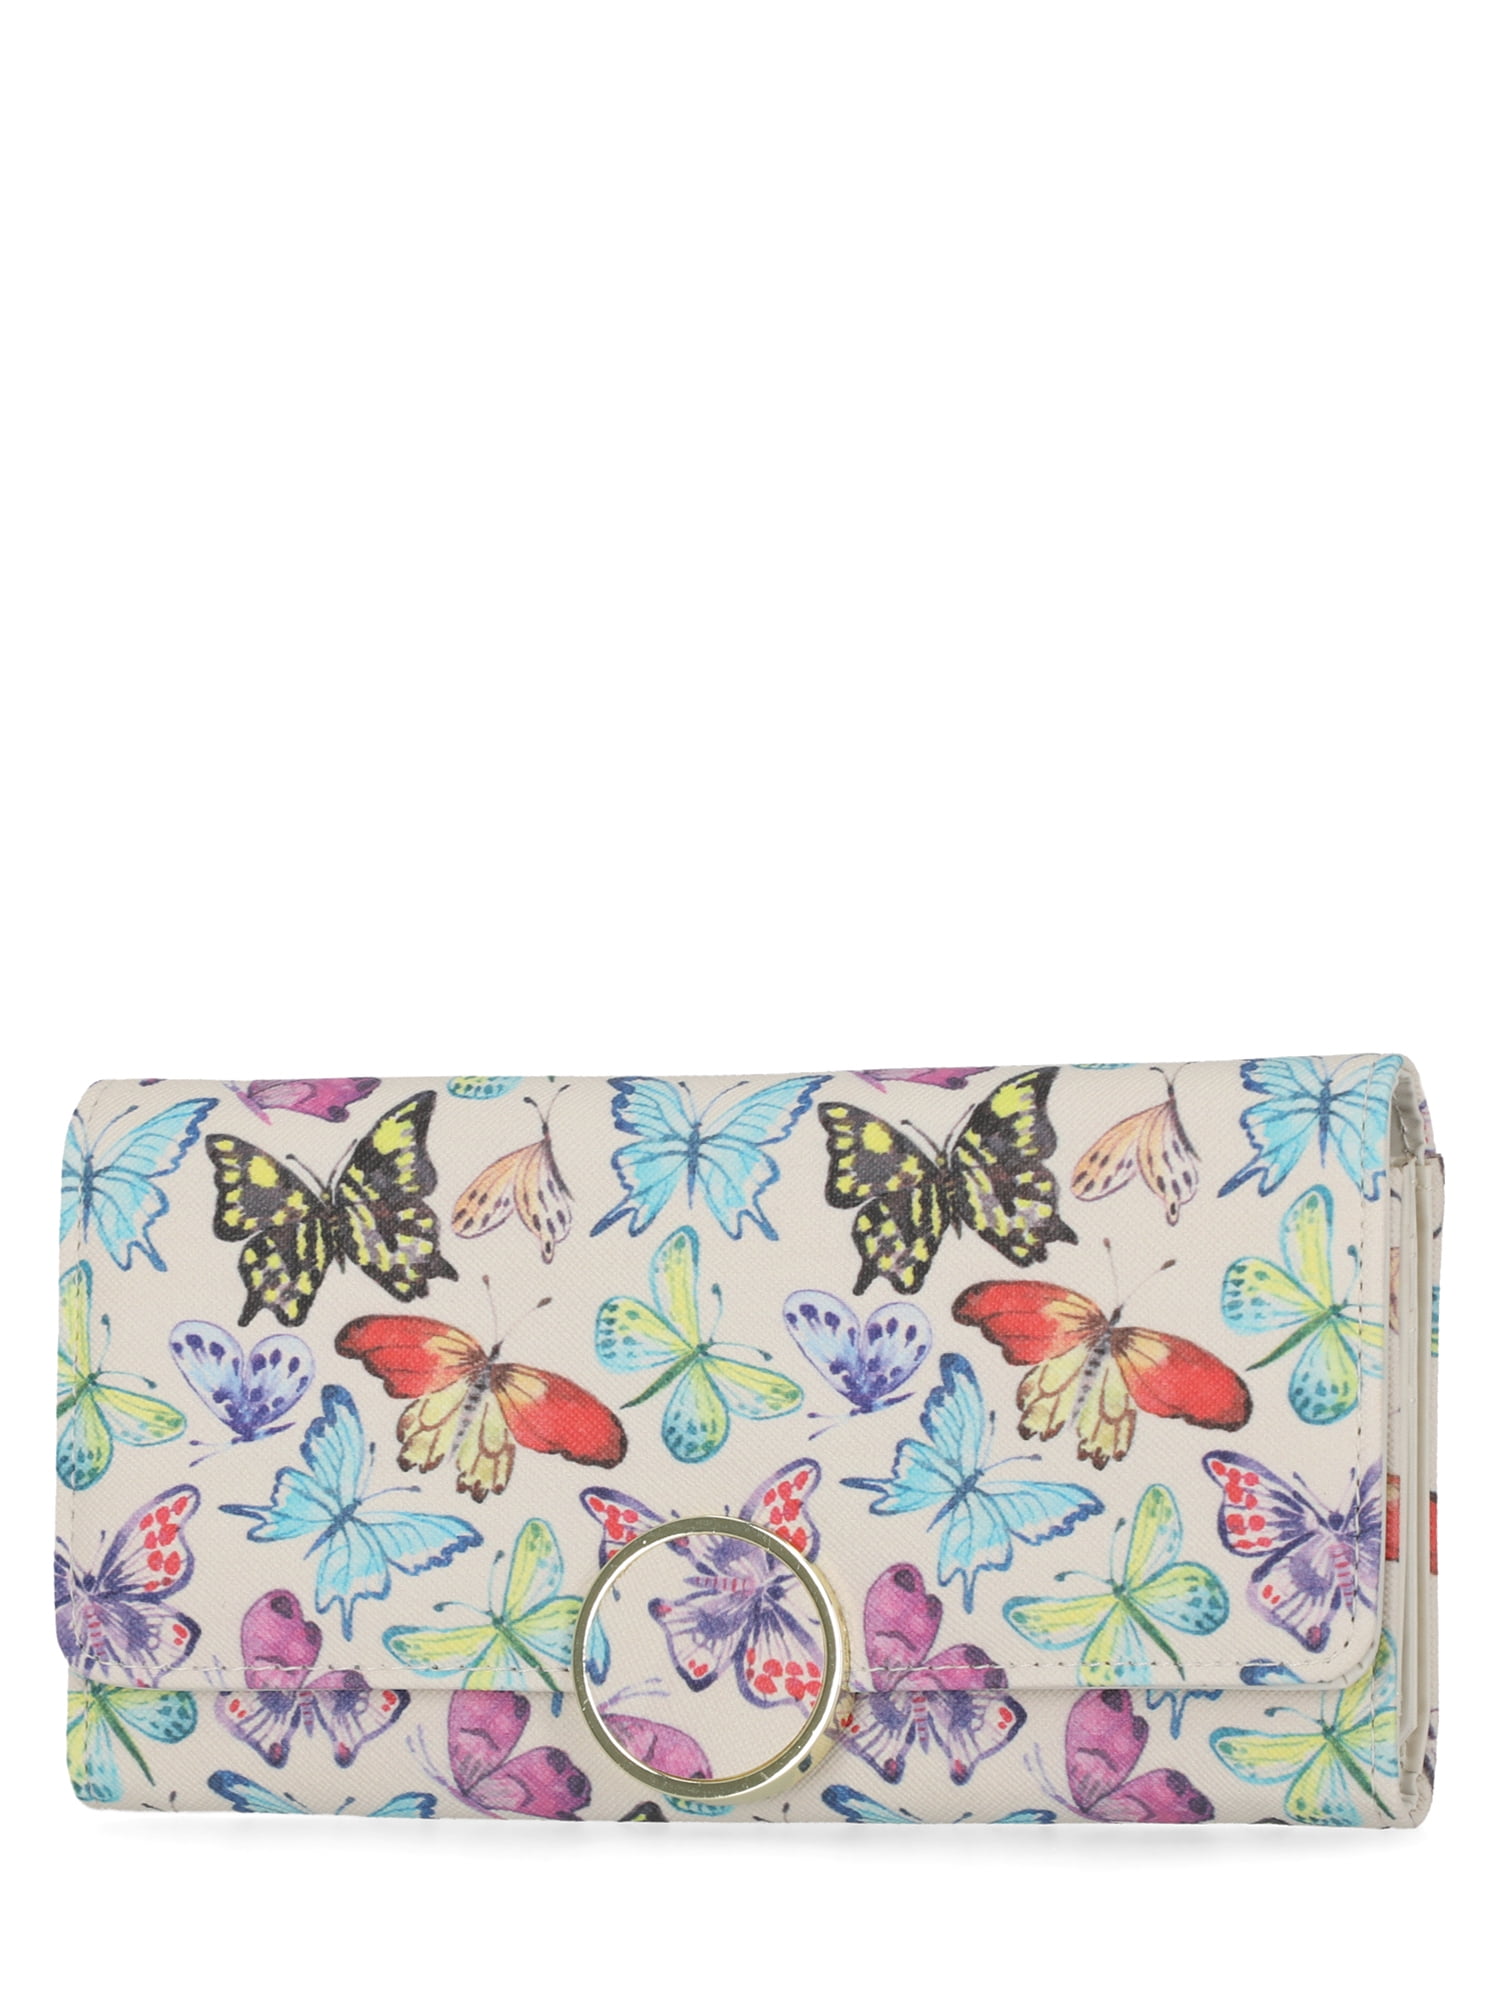 Time and Tru Women's Piper File Master Clutch Wallet Vinyl Butterfly Print